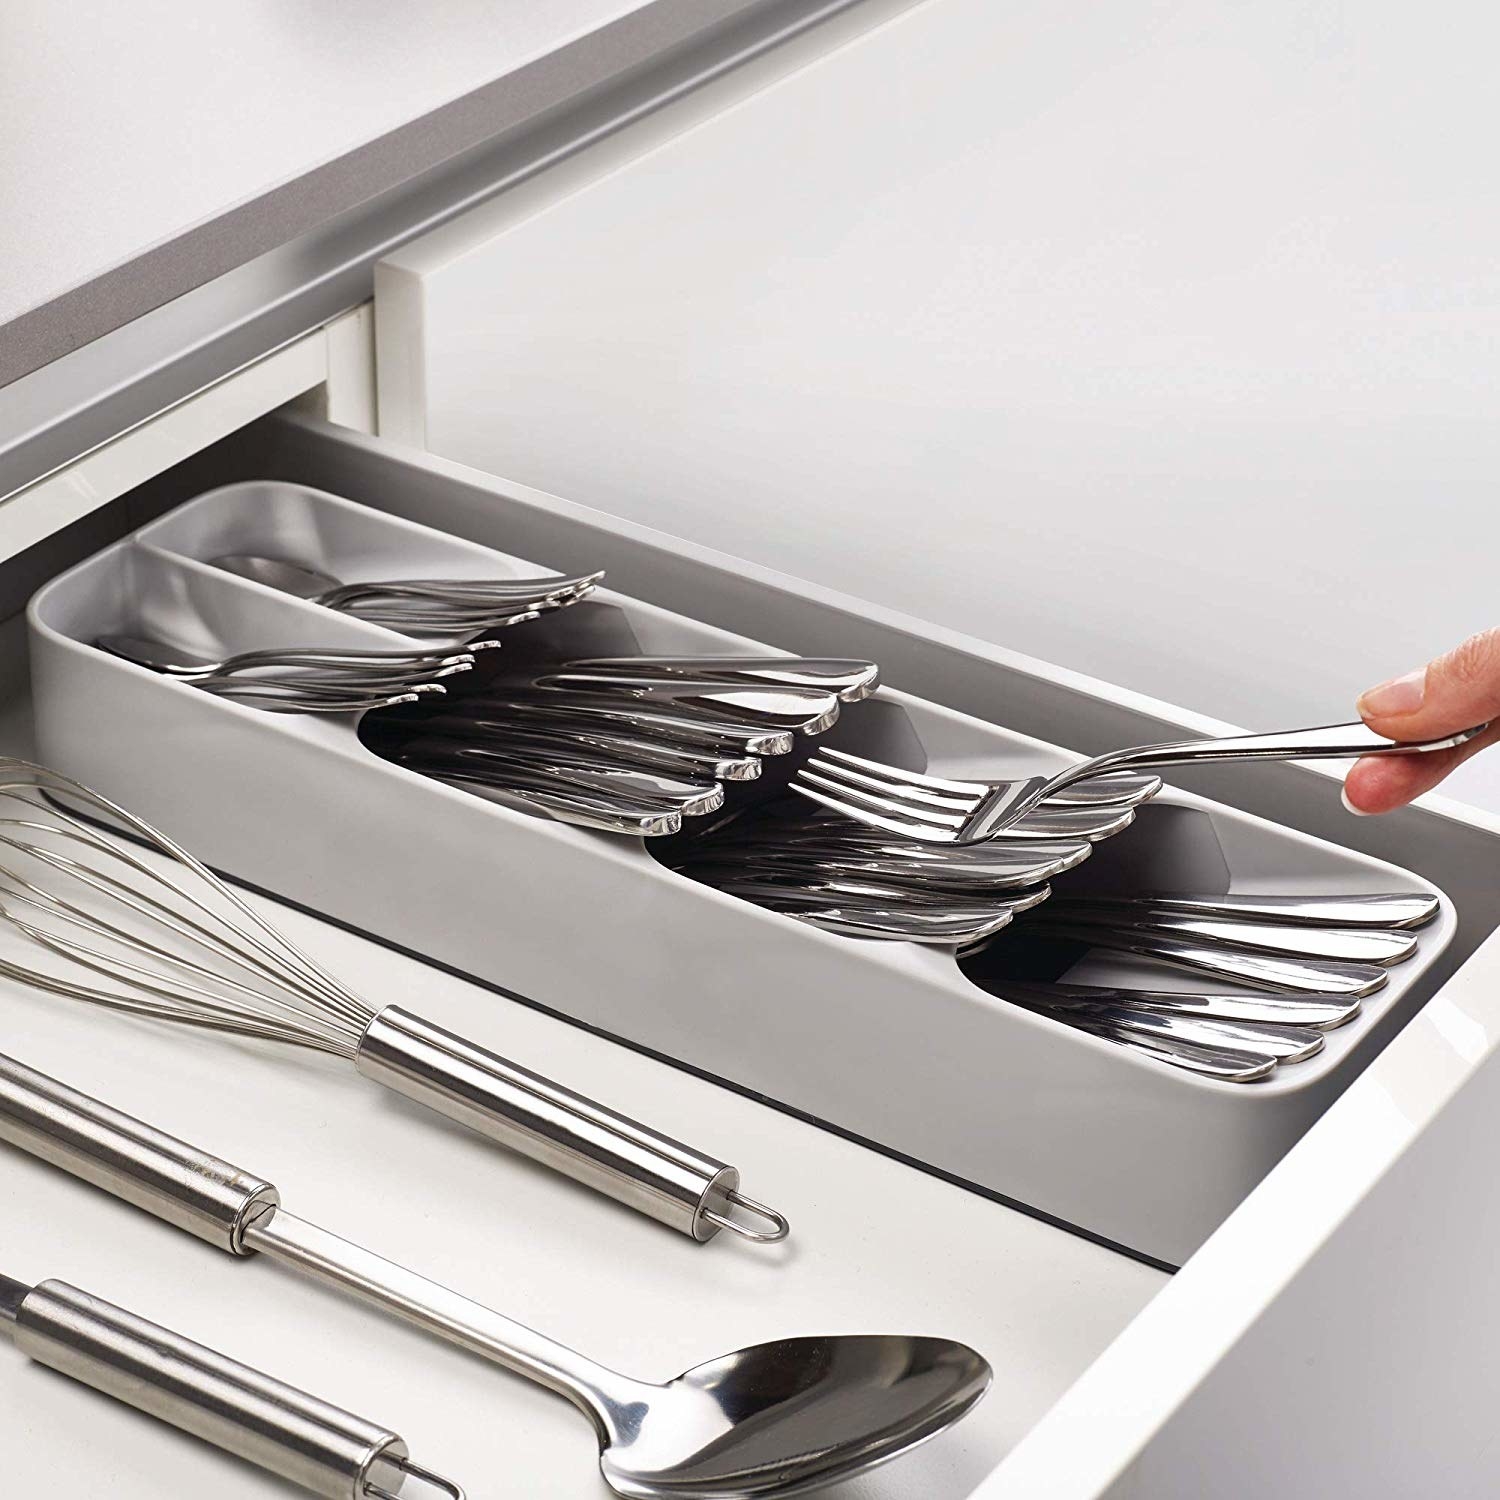 Silverware nicely organized in the tray as a Model puts a fork inside